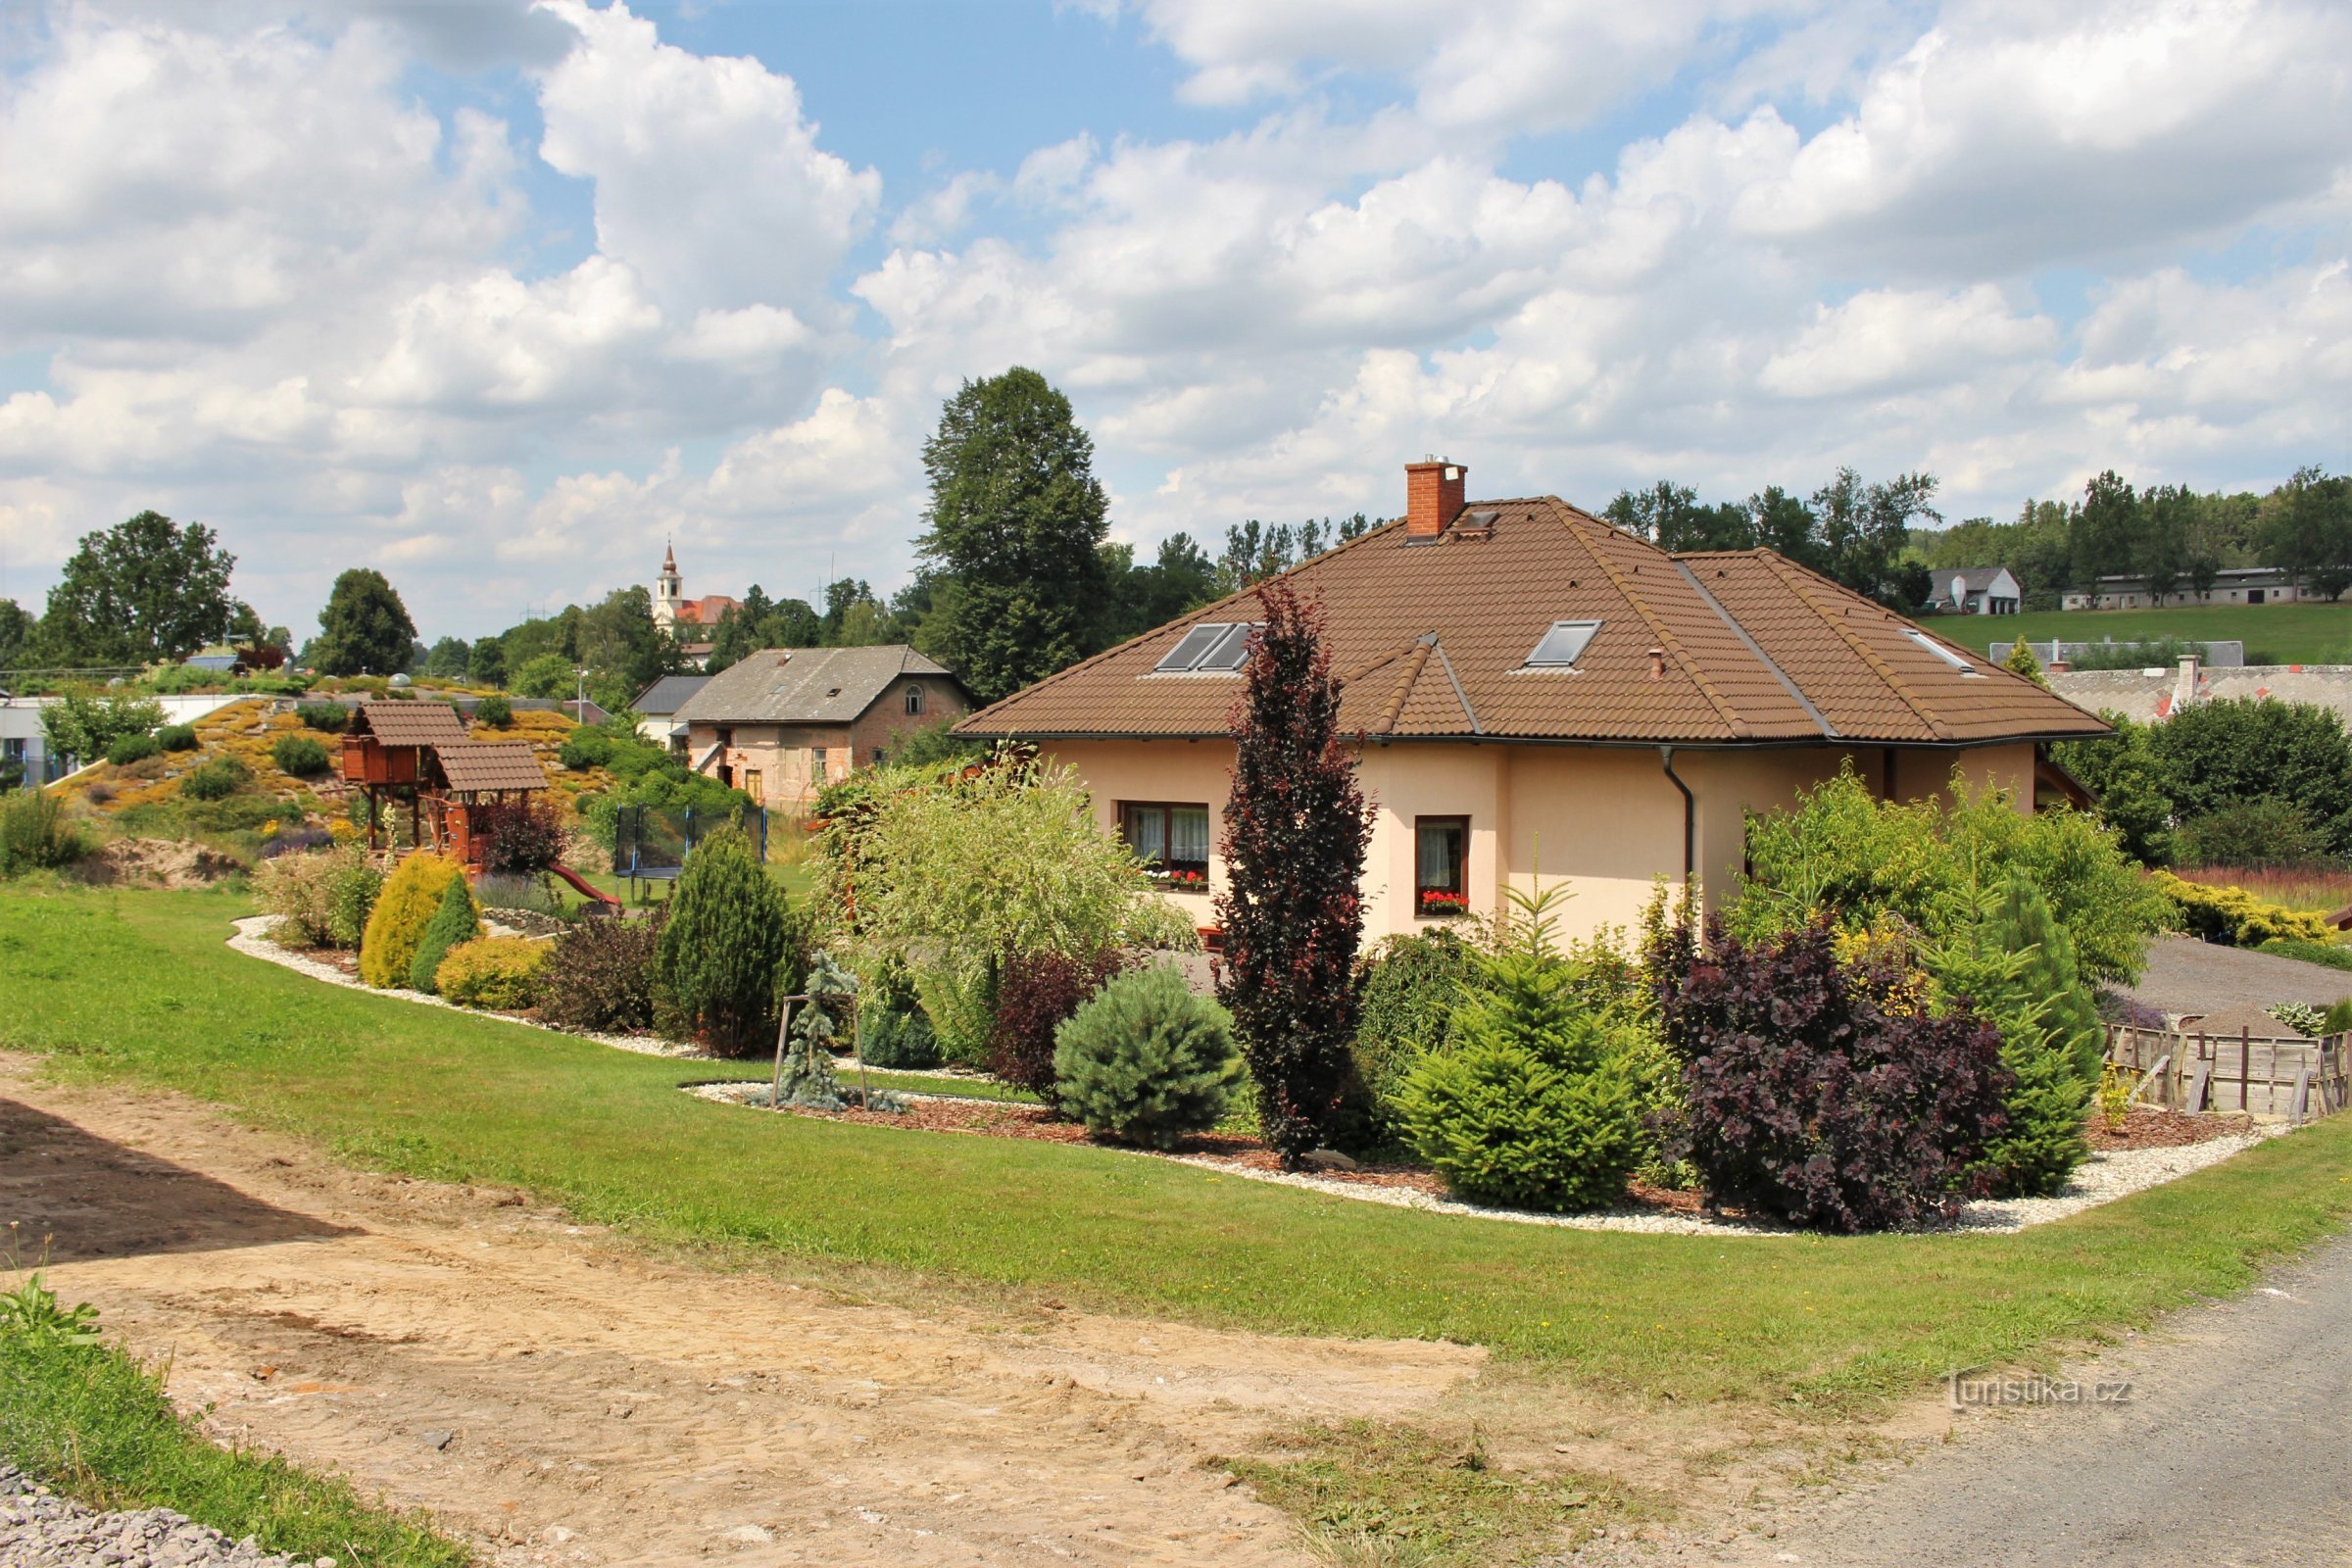 New family houses in the village